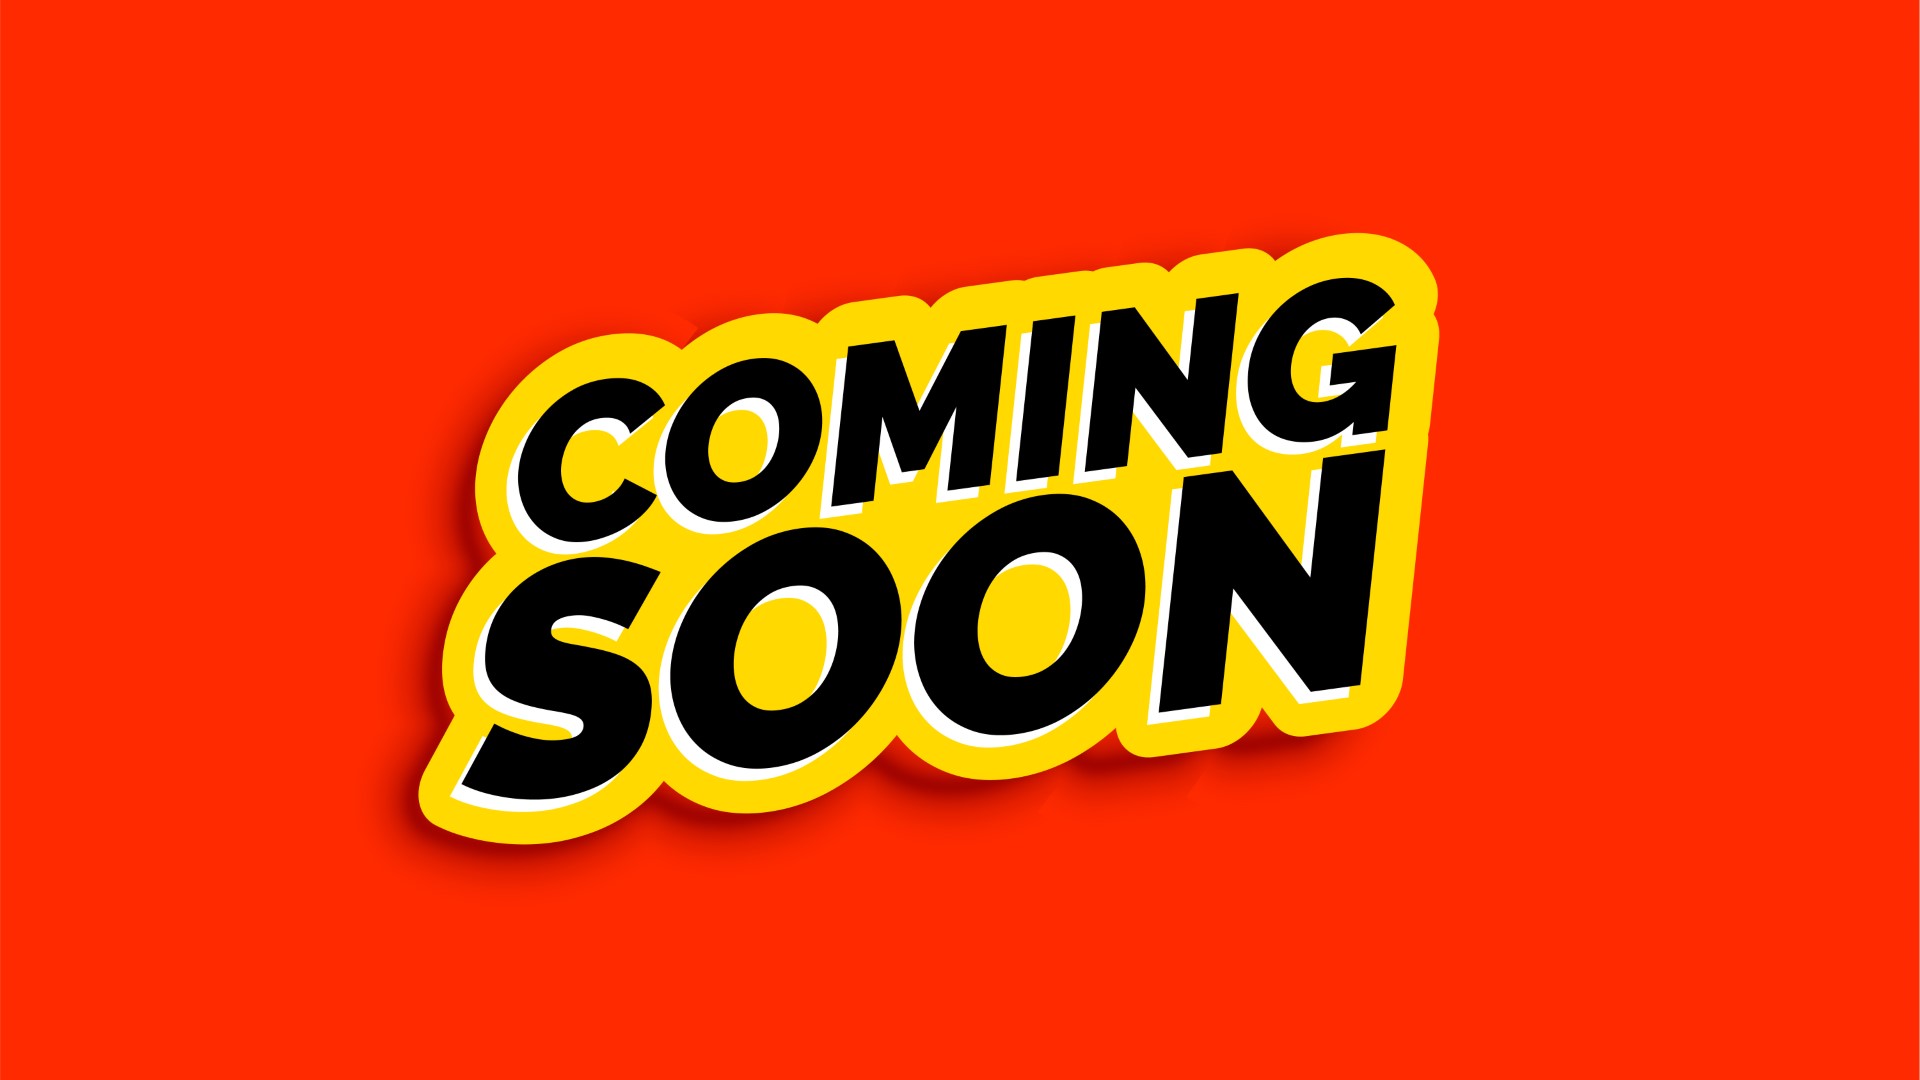 Coming soon sign Stock Photos, Royalty Free Coming soon sign Images |  Depositphotos